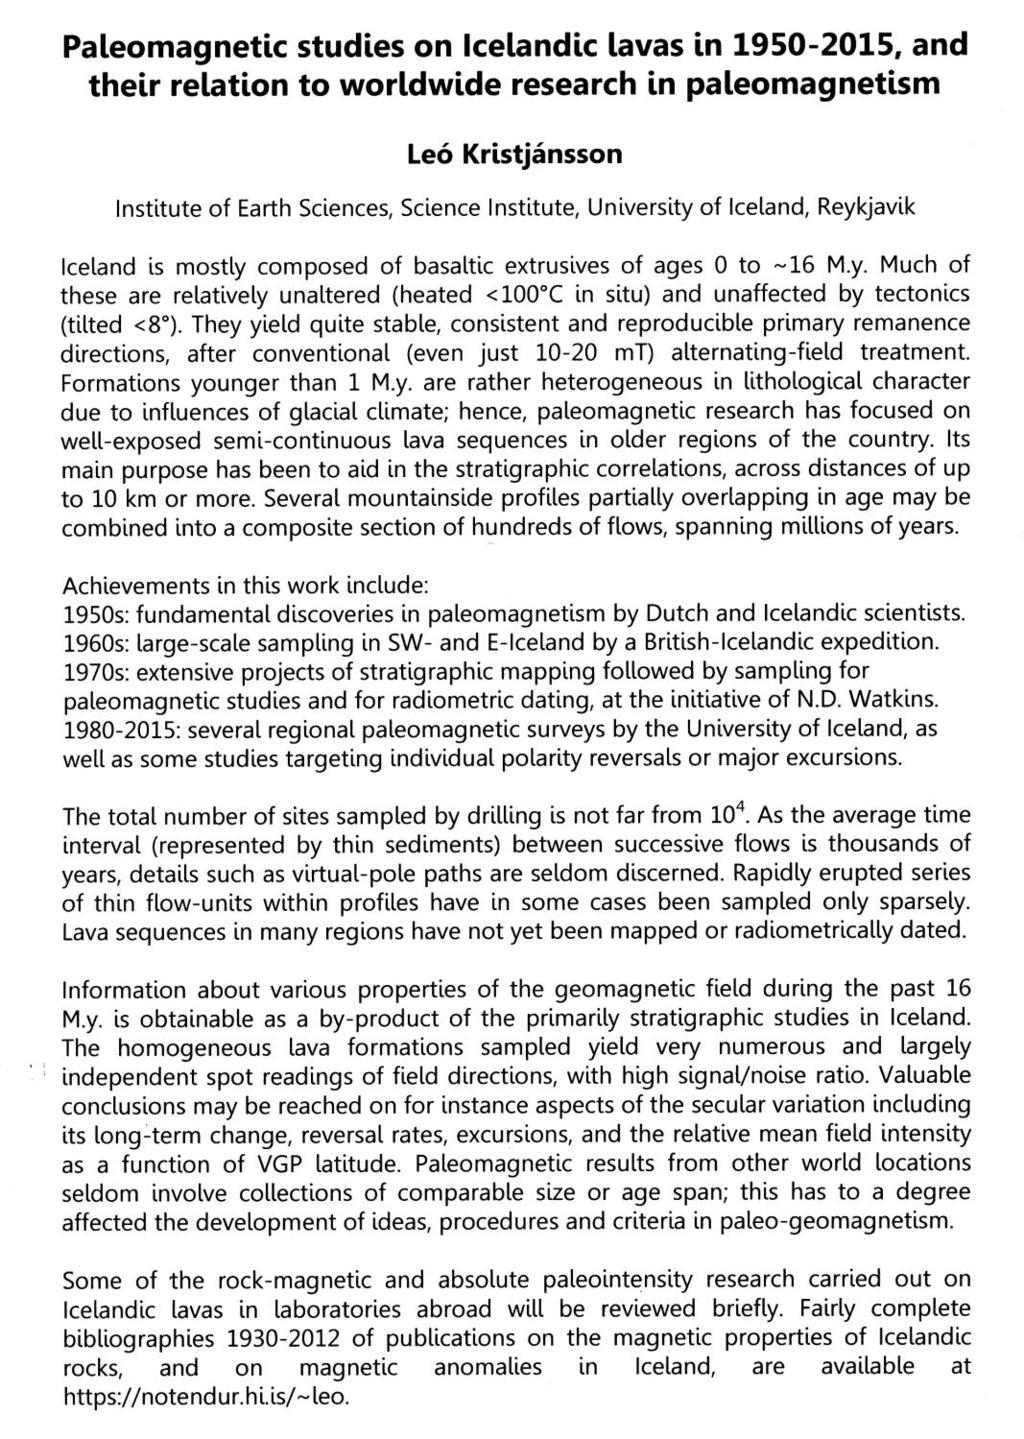 Abstract of the guest lecture given at the 8th Nordic Paleomagnetism